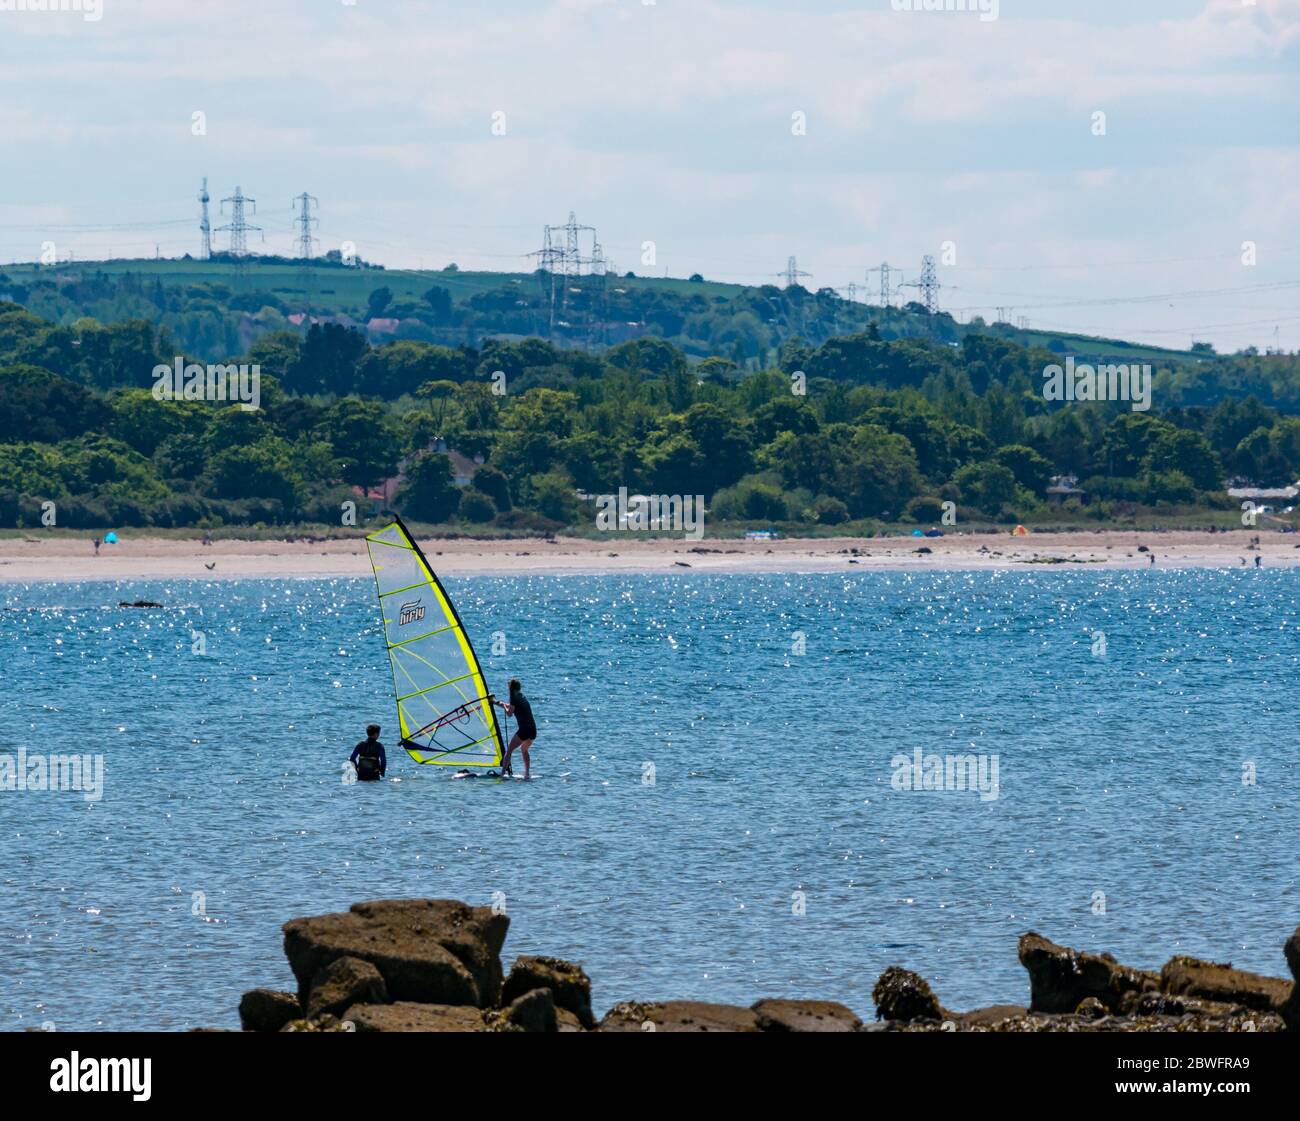 Longniddry Bents, East Lothian, Scotland, United Kingdom, 1st June 2020. UK Weather: hot sunshine at the beach brings people out despite the public car park still being closed during the Covid-19 pandemic lockdown. A windsurfing lesson in the Firth of Forth Stock Photo